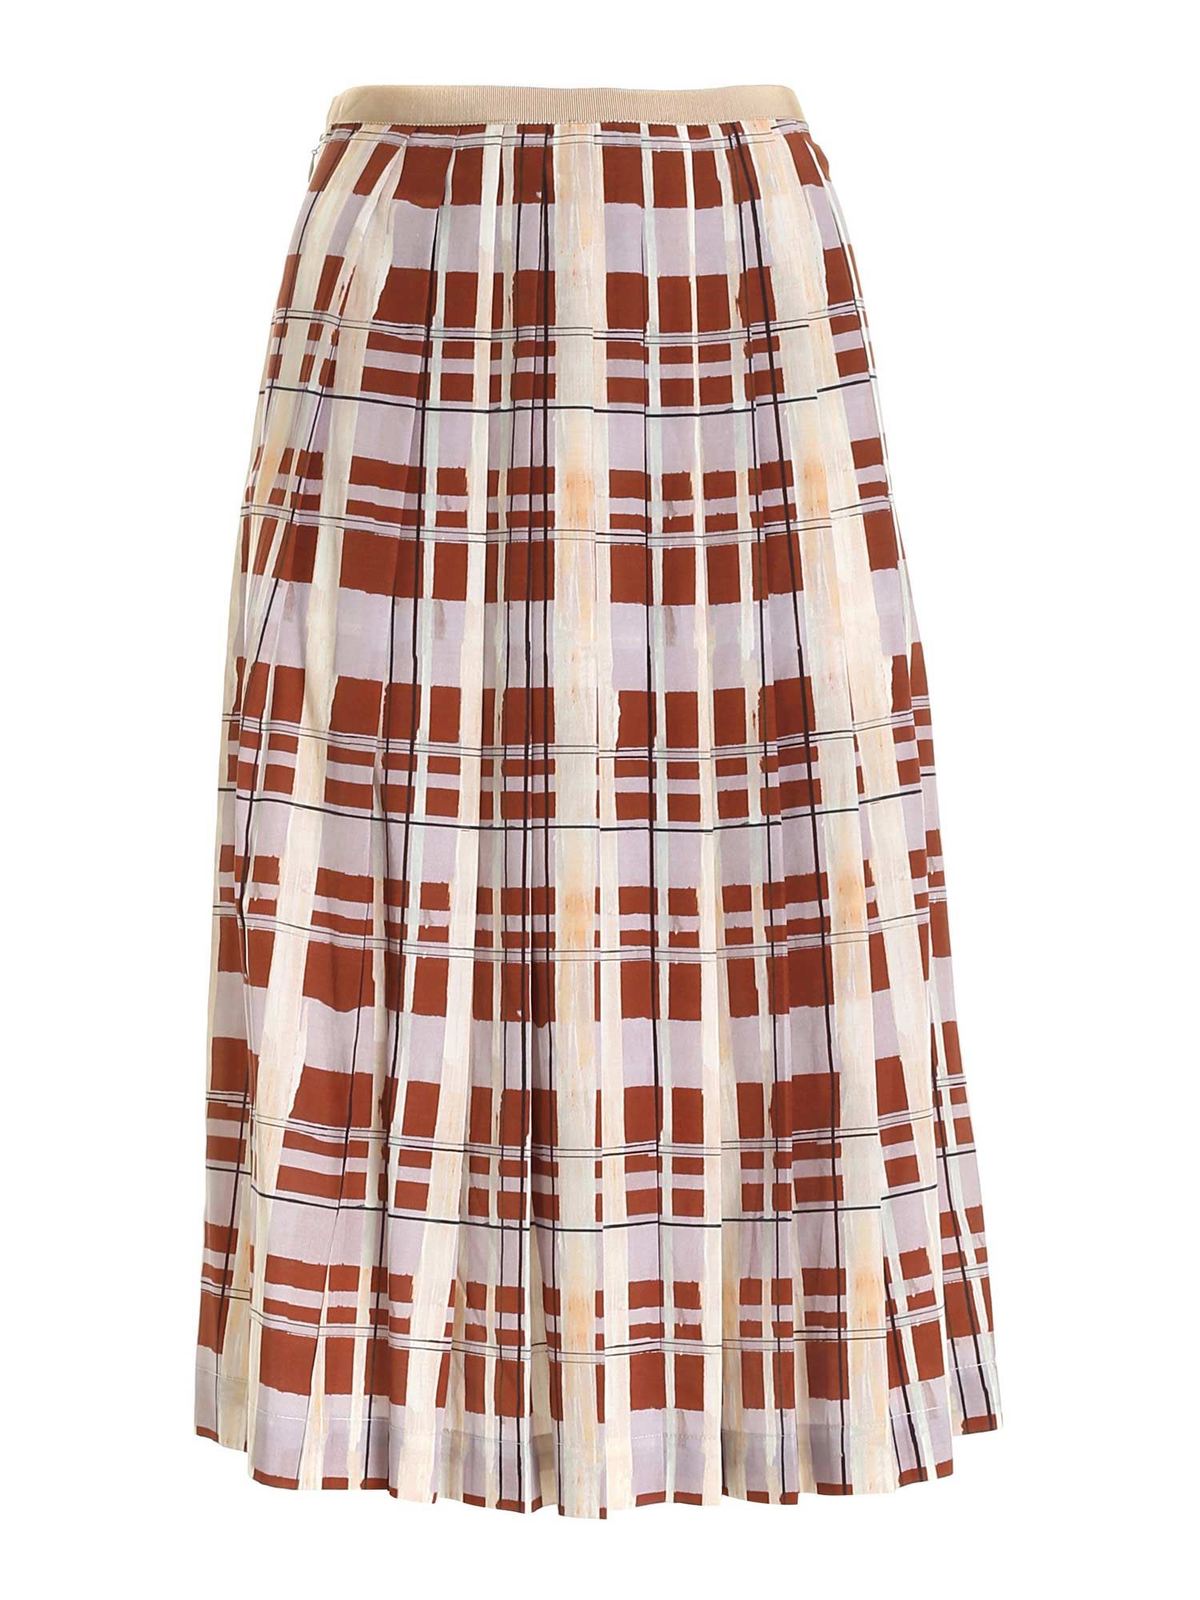 Ballantyne CHECK PRINT SKIRT IN BROWN AND LILAC